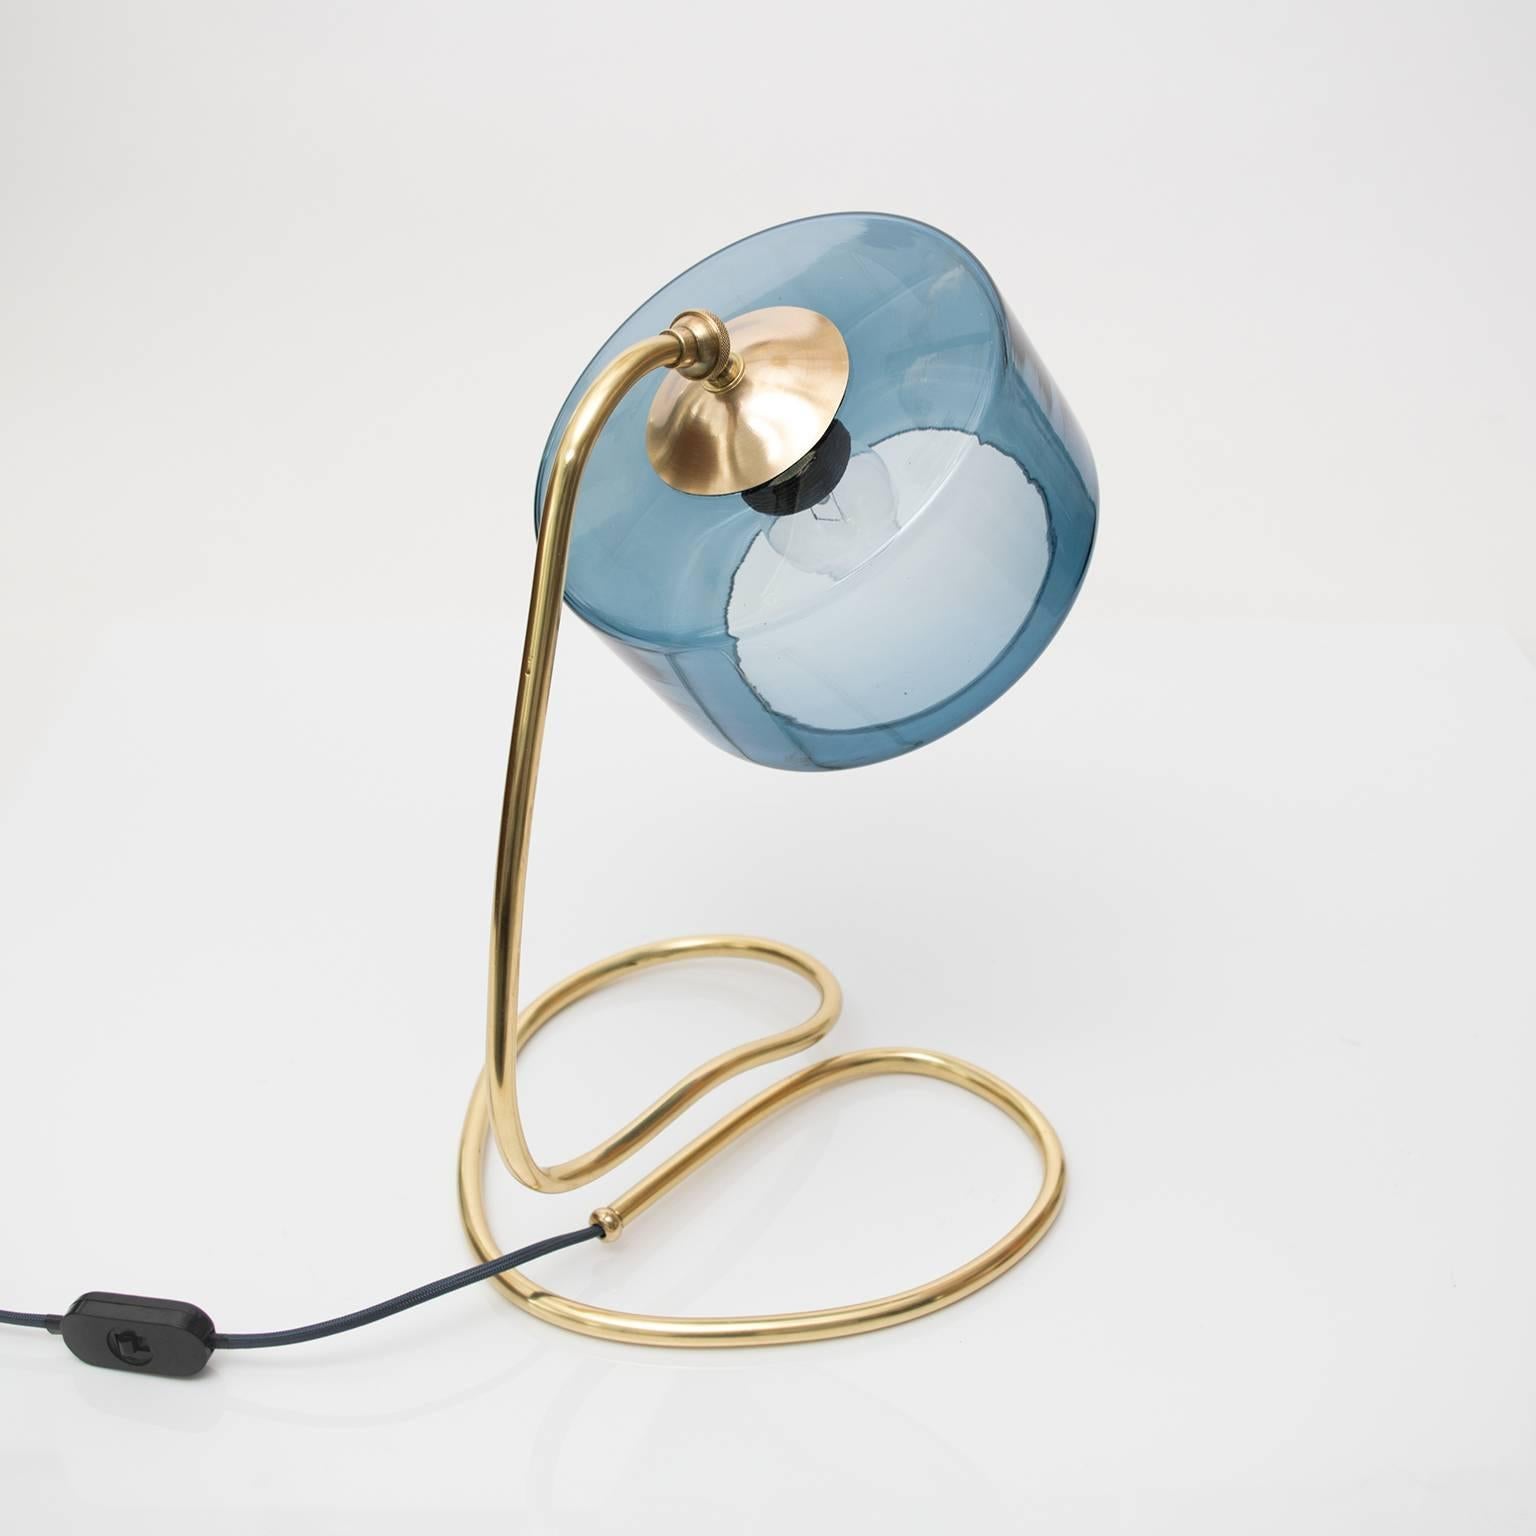 Polished Scandinavian Modern Brass Lamp with Coil Base and Blue Glass Shade